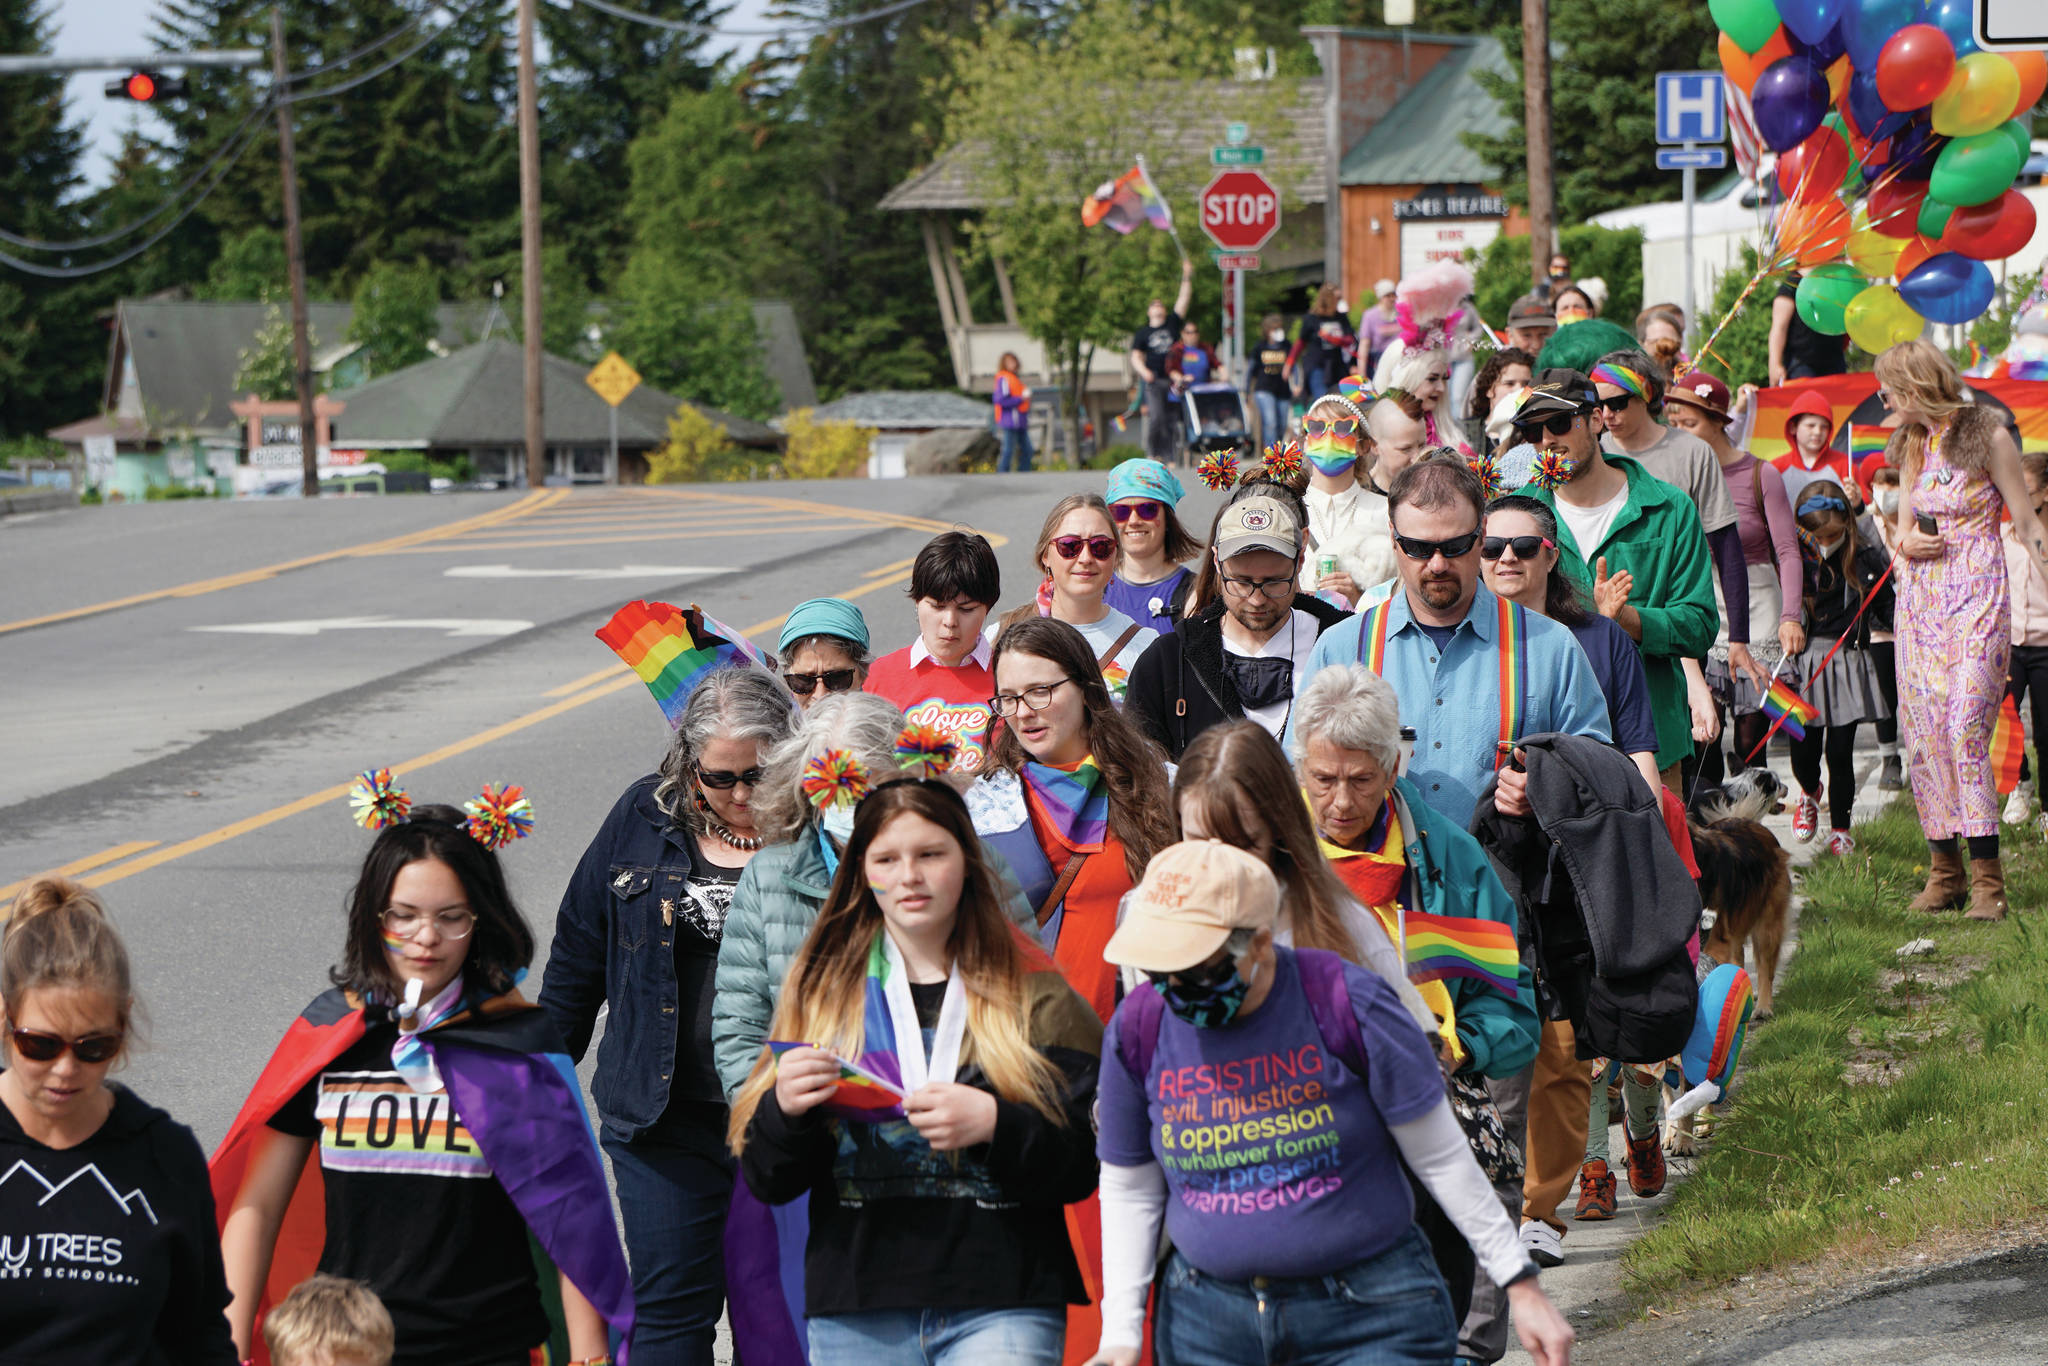 People march in a combined Pride and Juneteenth event on Saturday, June 19, 2021, along Pioneer Avenue in Homer, Alaska. (Photo by Michael Armstrong/Homer News)